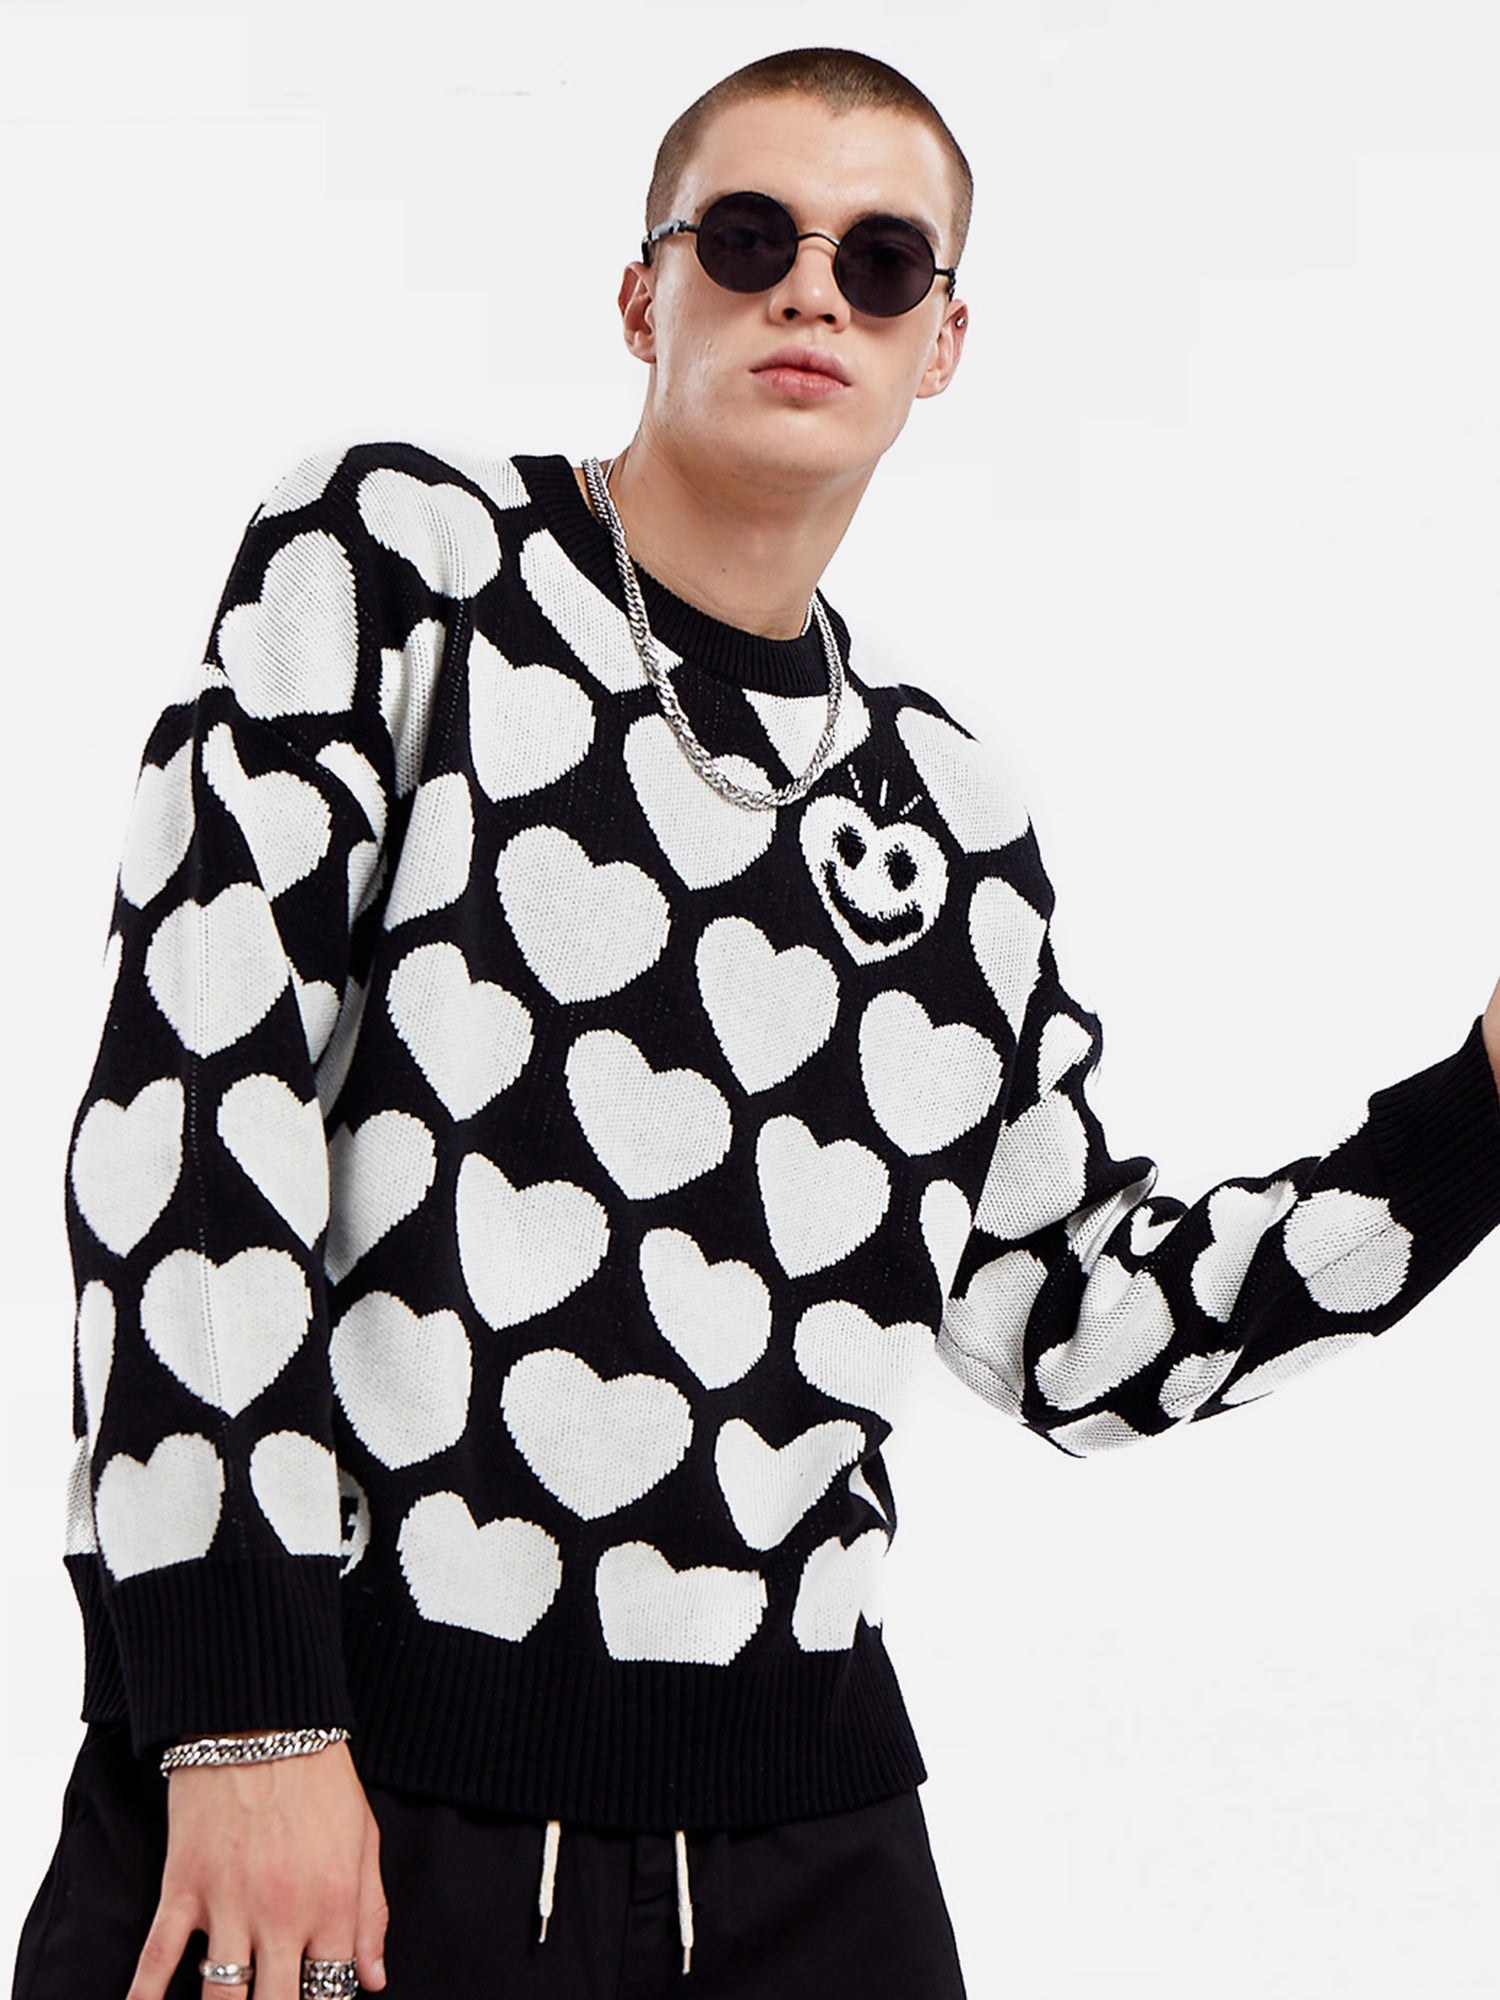 Street Casual Hiphop Print Round-Neck Black Long-Sleeve Sweaters for men's